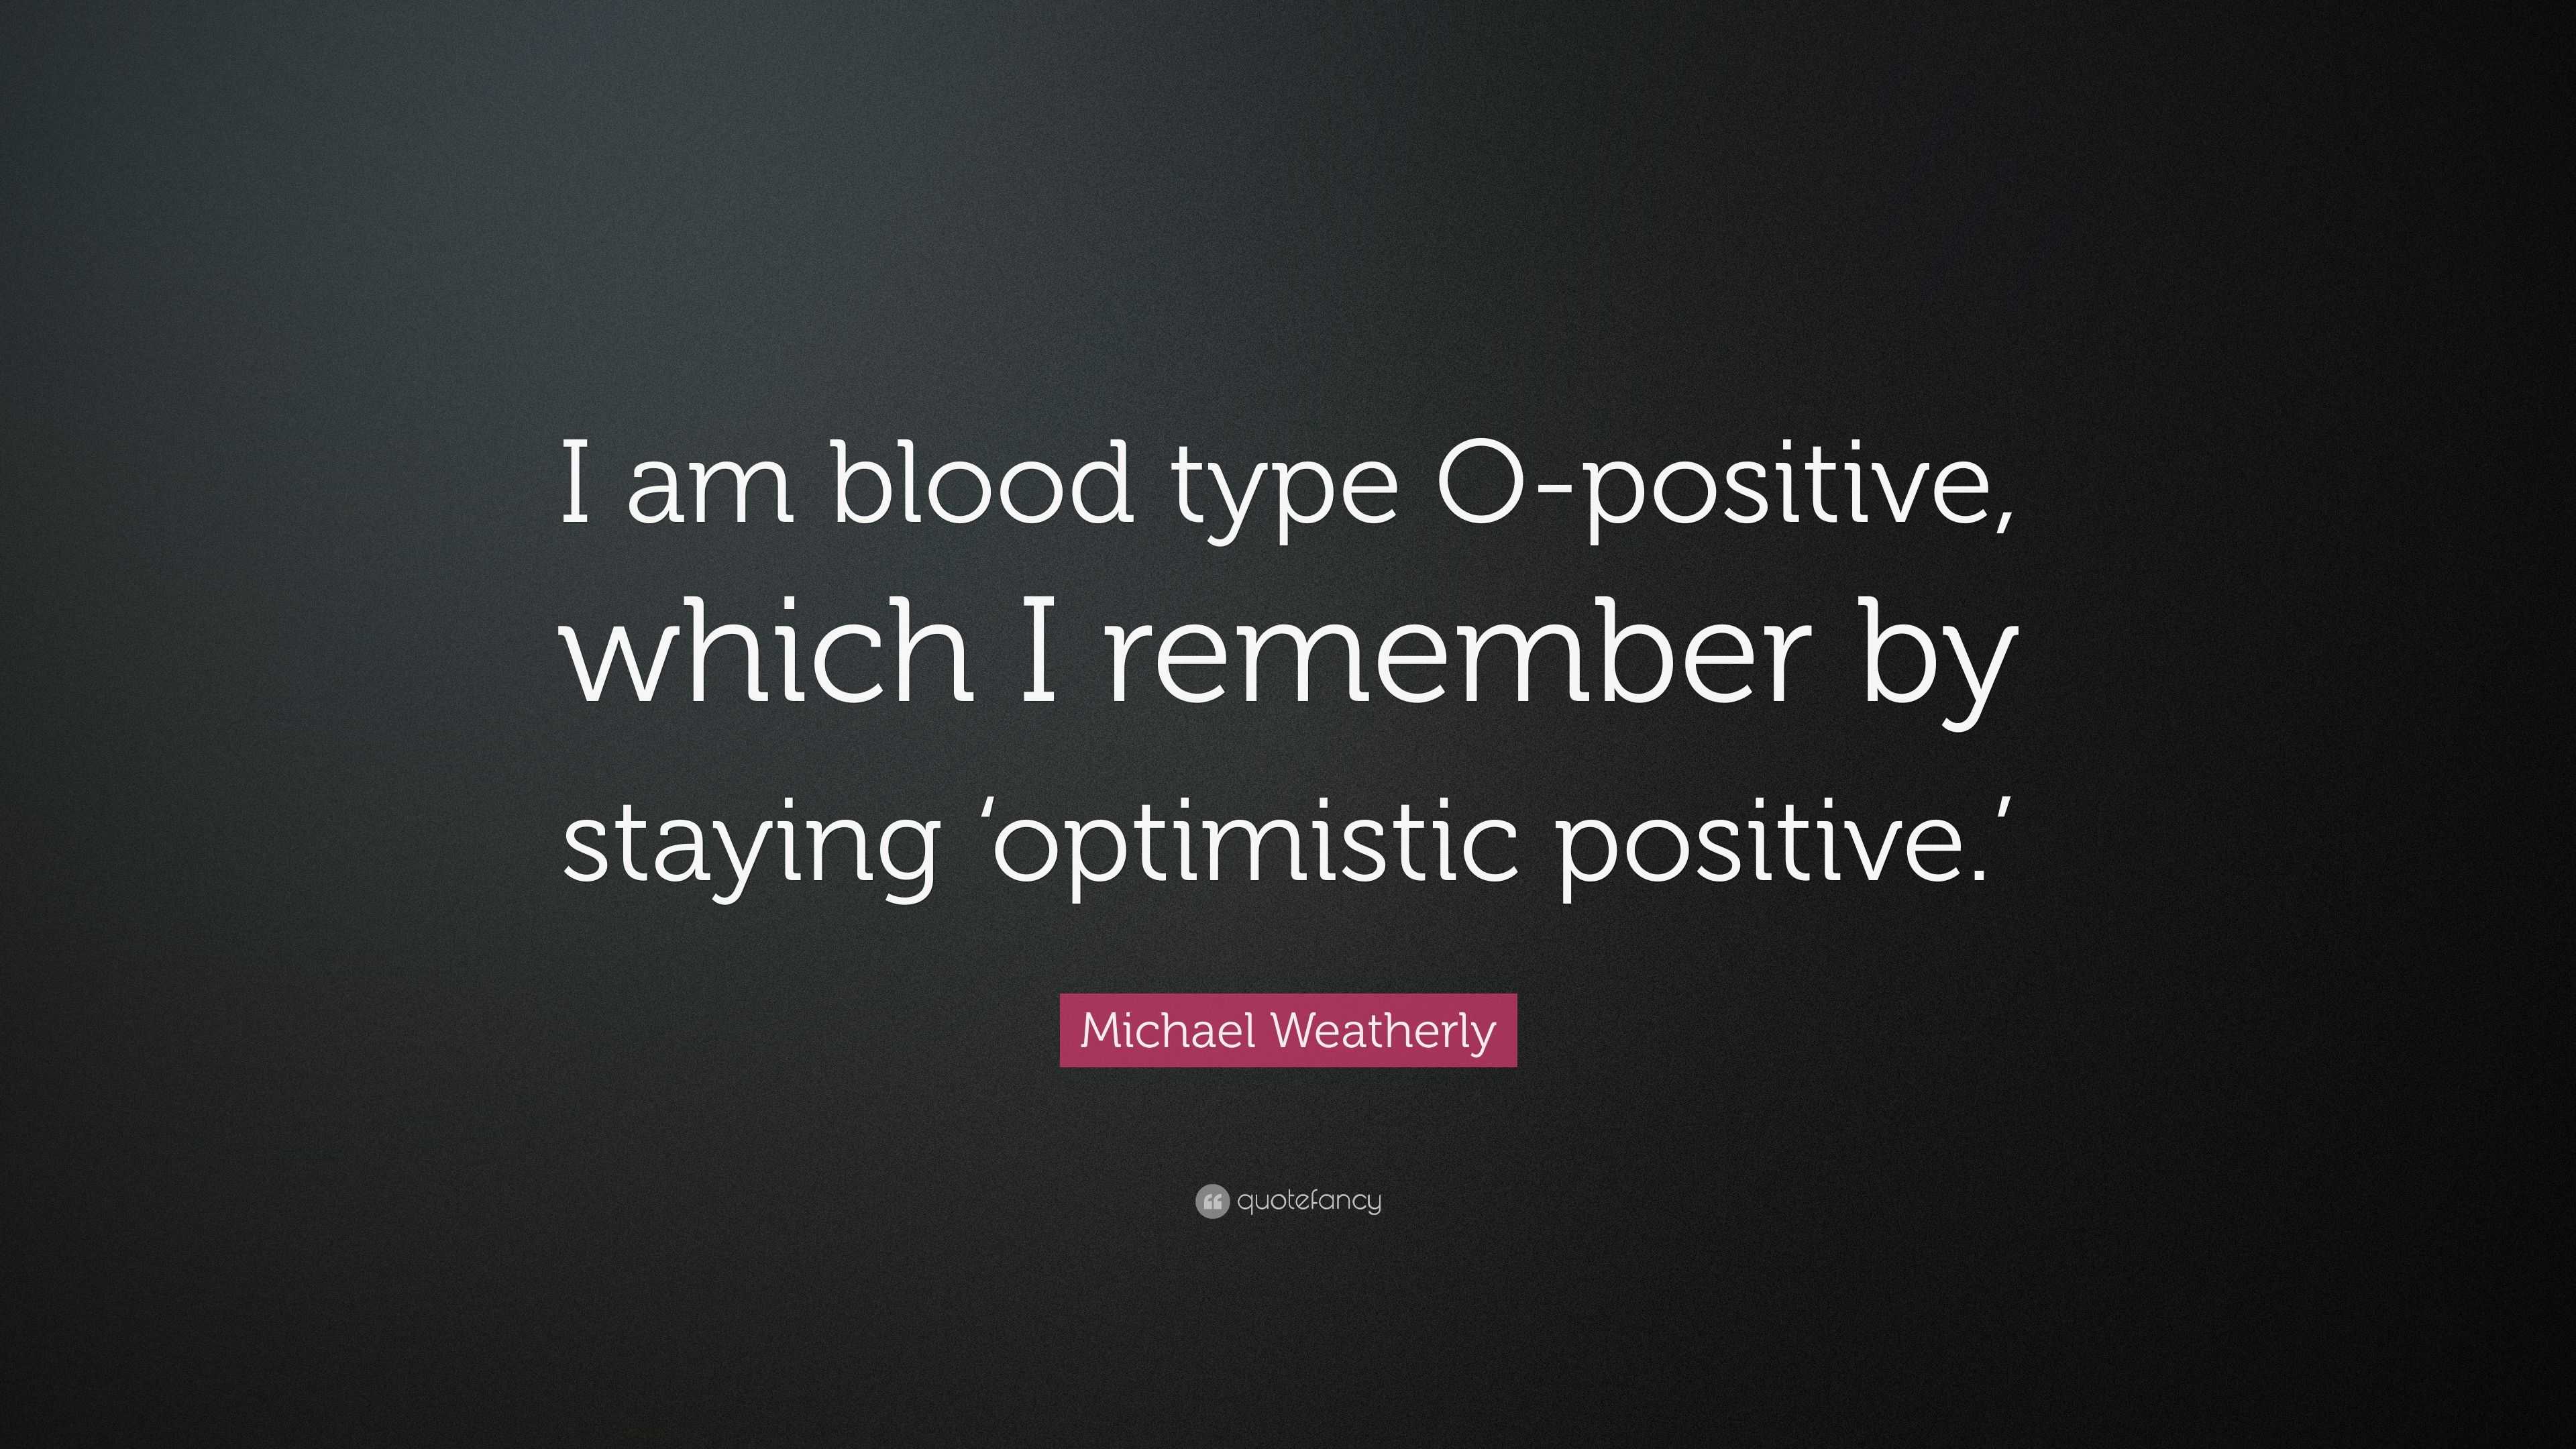 Michael Weatherly Quote: “I am blood type O-positive, which I remember by  staying 'optimistic positive.'”